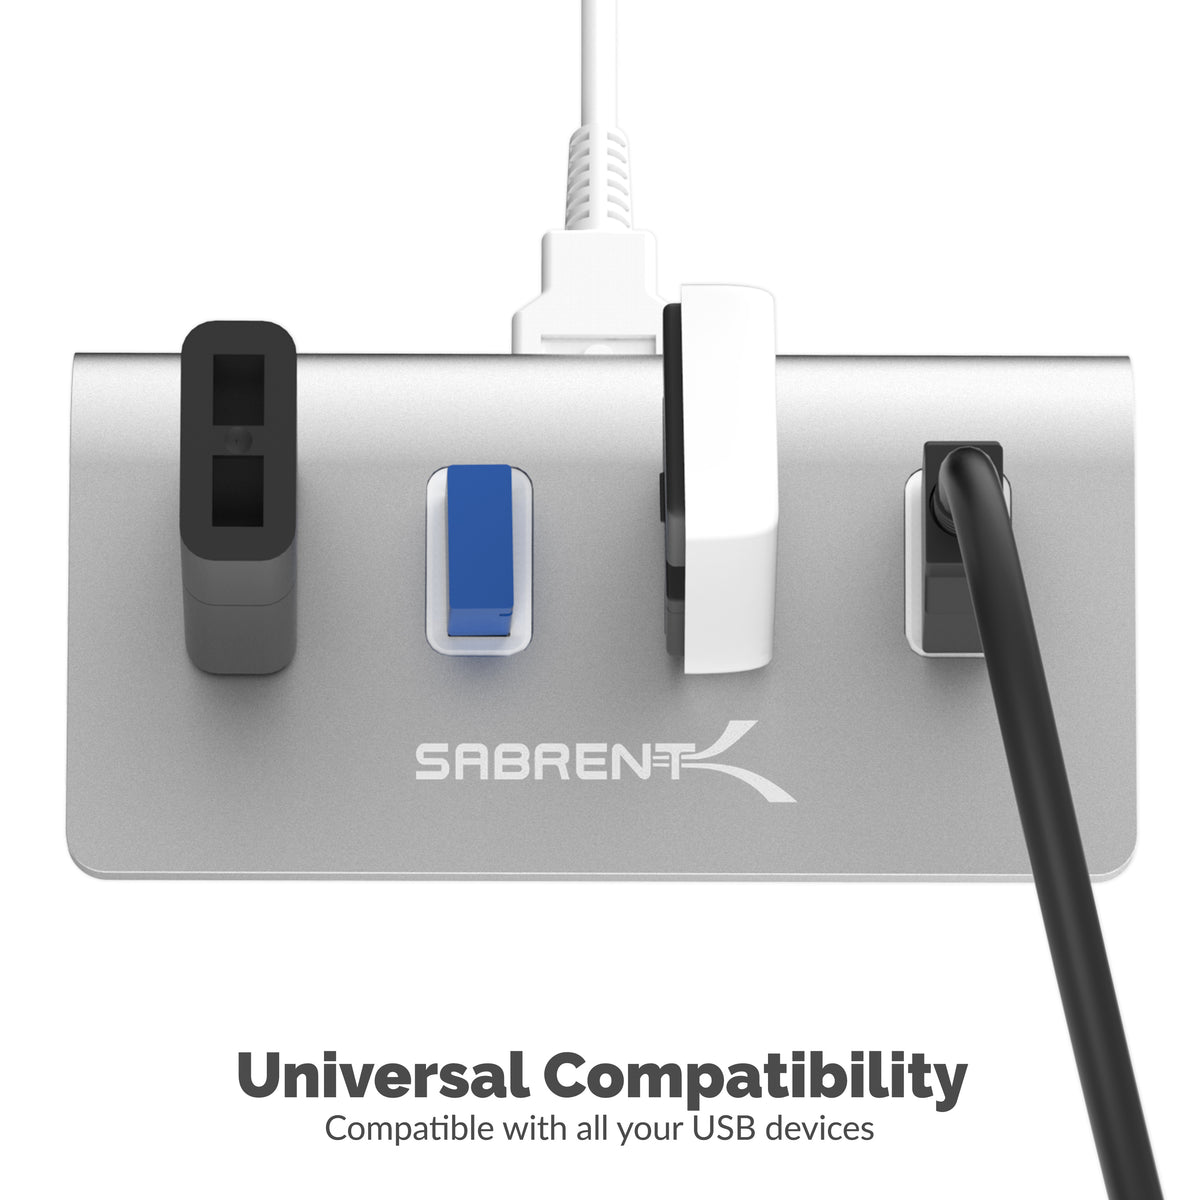 Premium 4 Port Aluminum USB 3.0 Hub (30&quot; Cable) for iMac, MacBook, MacBook Pro, MacBook Air, Mac Mini, or Any PC [Silver] 5V/4A Power Adapter Included